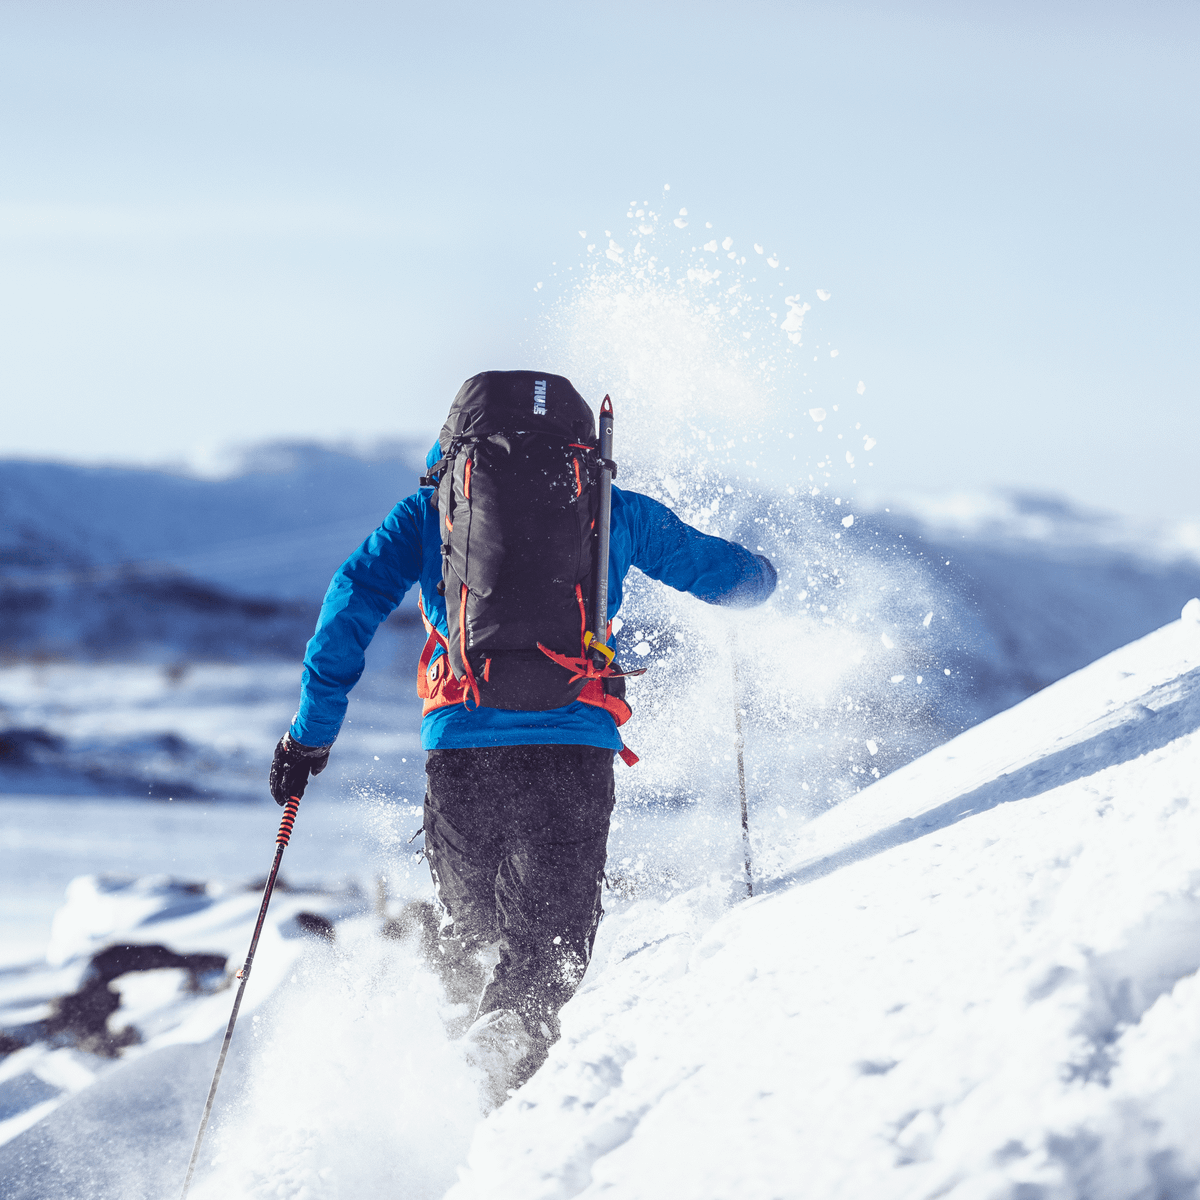 A man cross country skis in the snowy mountains carrying a Thule AllTrail 45L backpack.